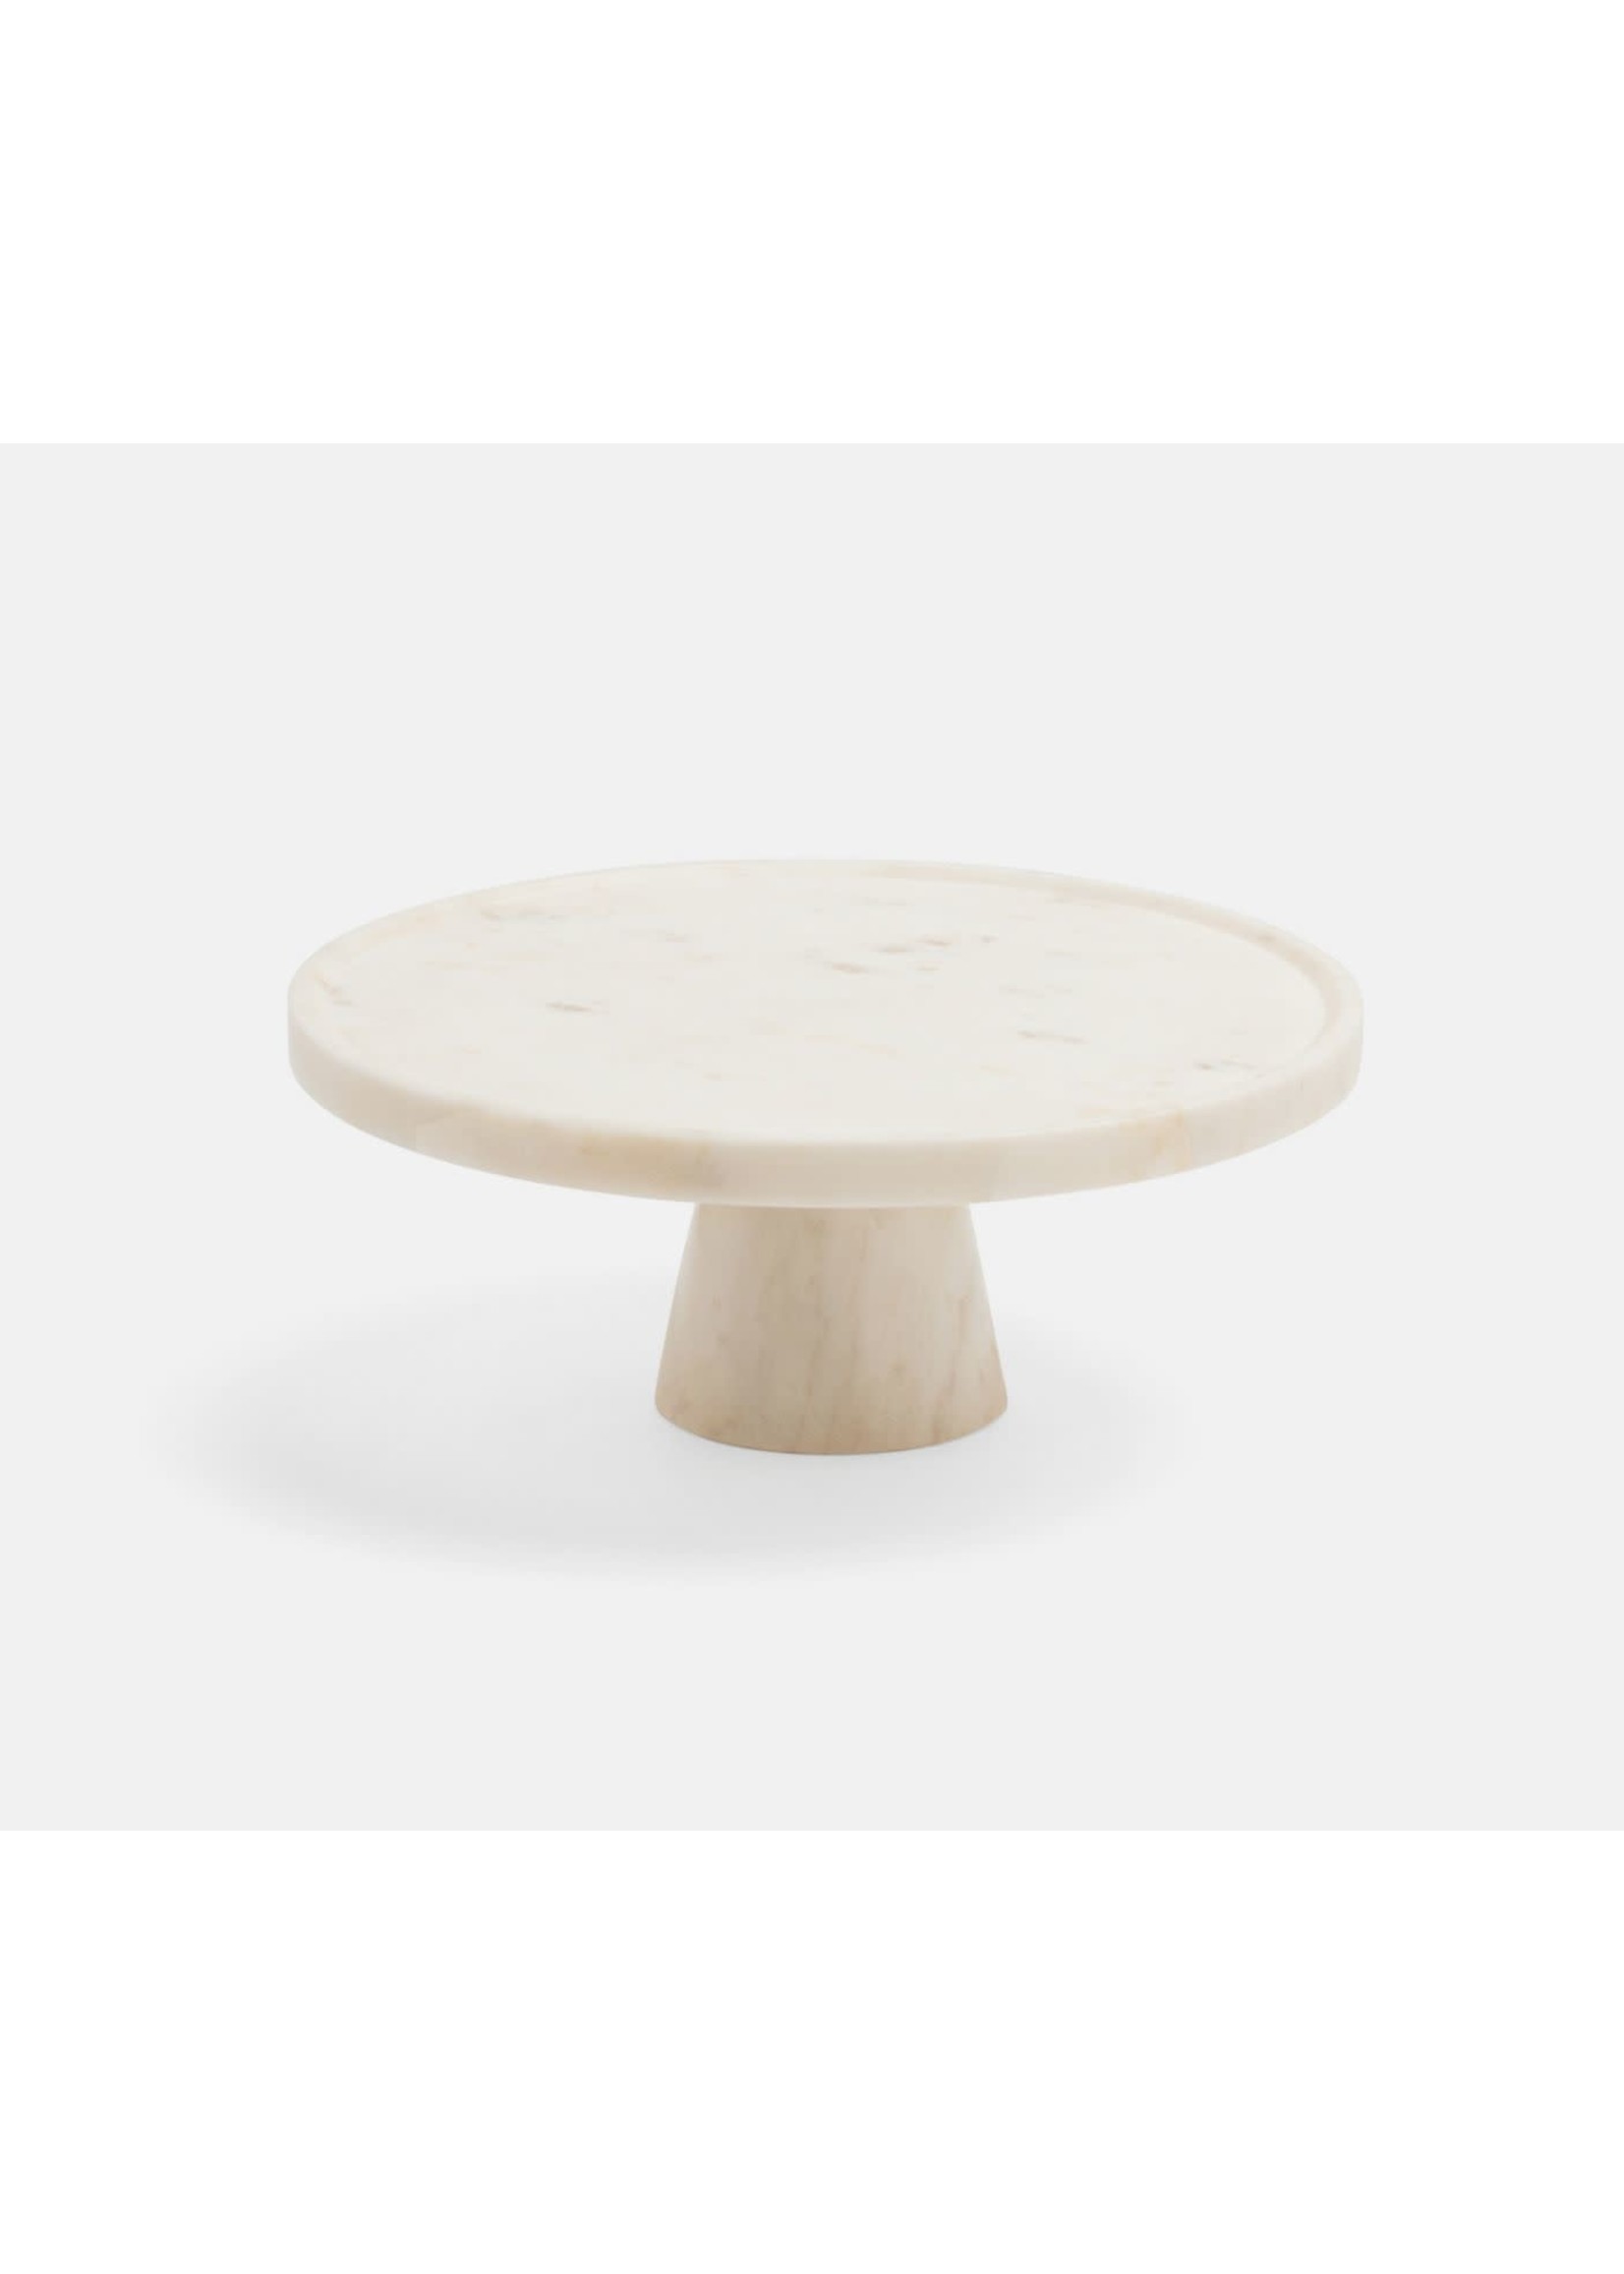 Godinger Silver Art Co Della Marble Cake Stand With Dome | Wayfair